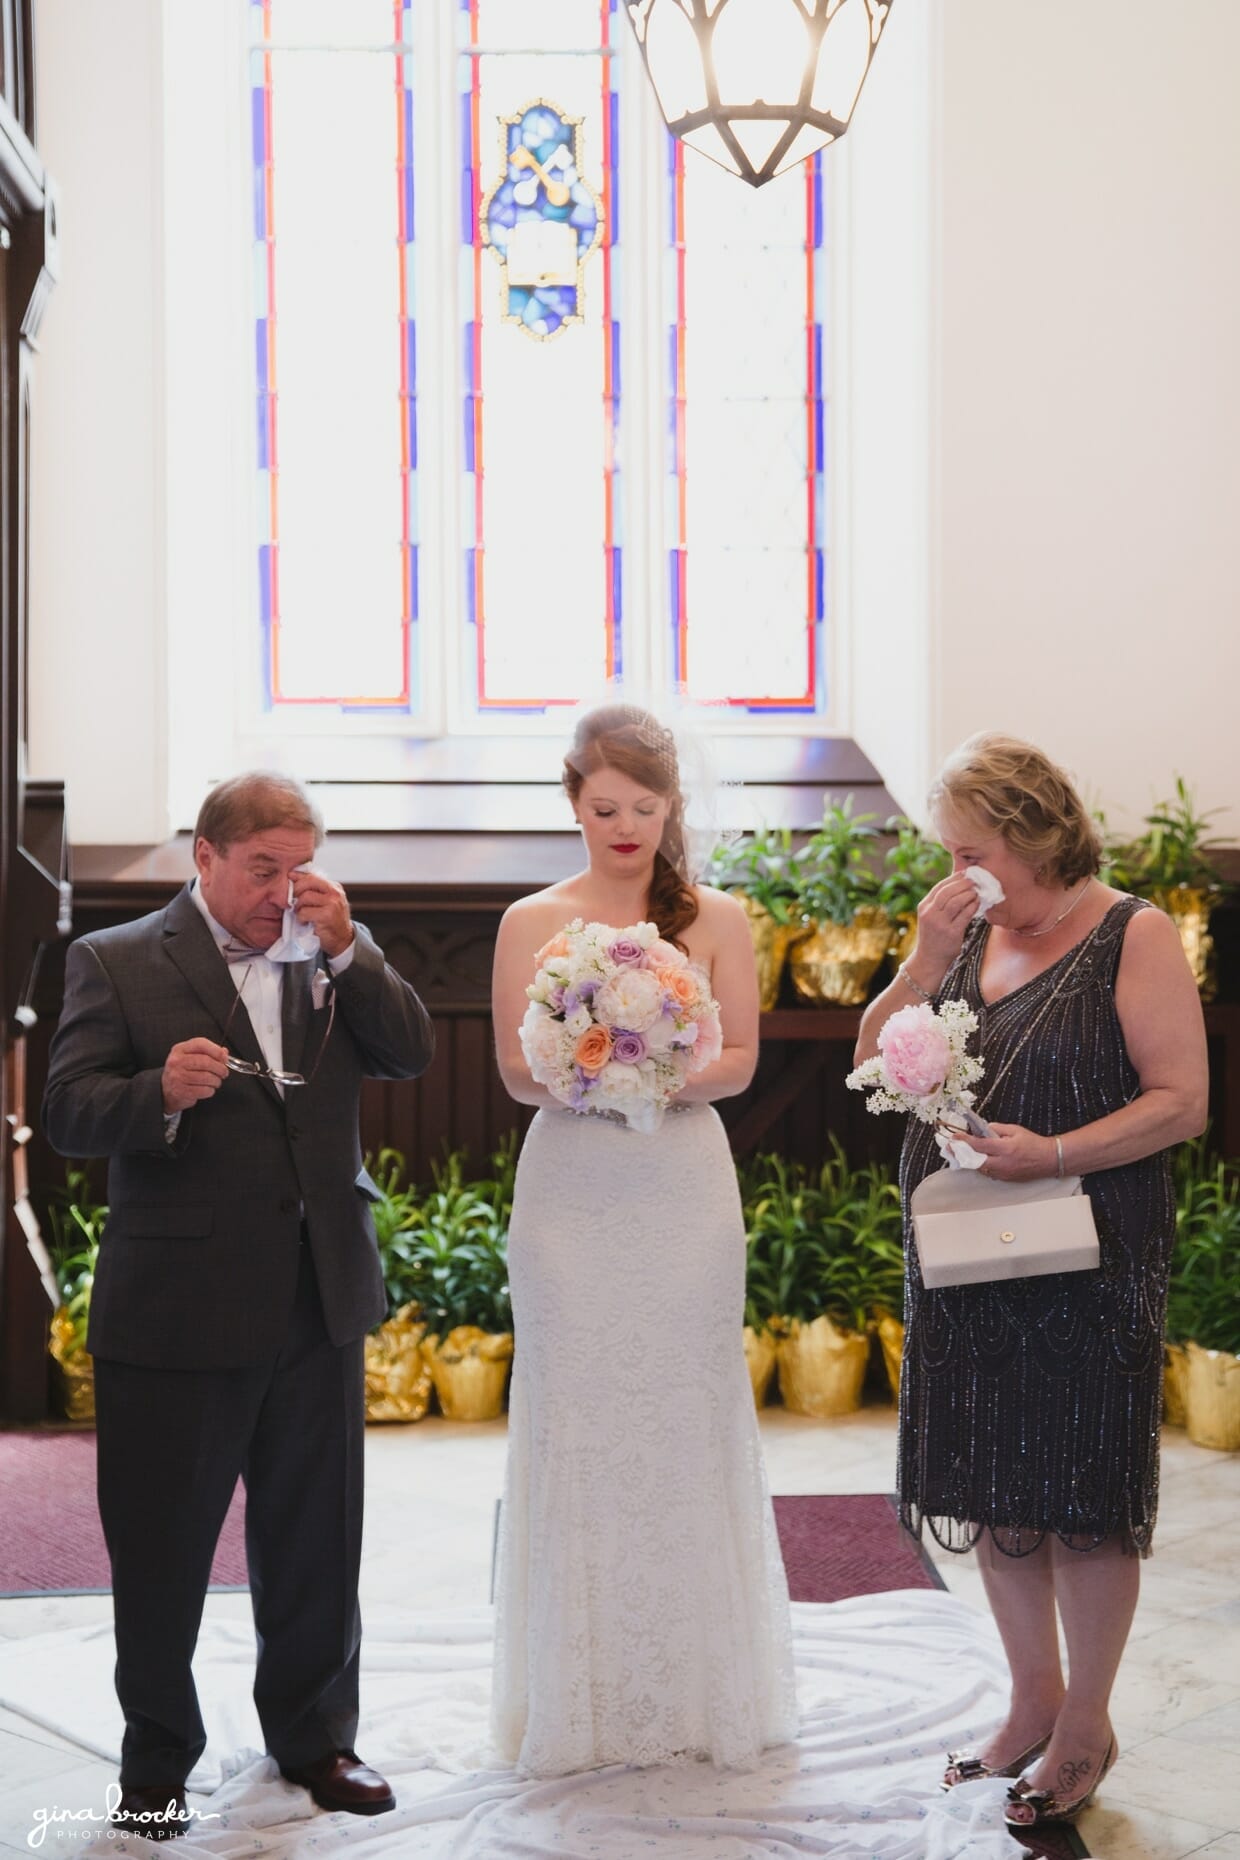 A bride shares a special moment with her parents at the Sacred Heart of Jesus Church, Cambridge, Massachusetts just before she walks up the aisle for her wedding ceremony 